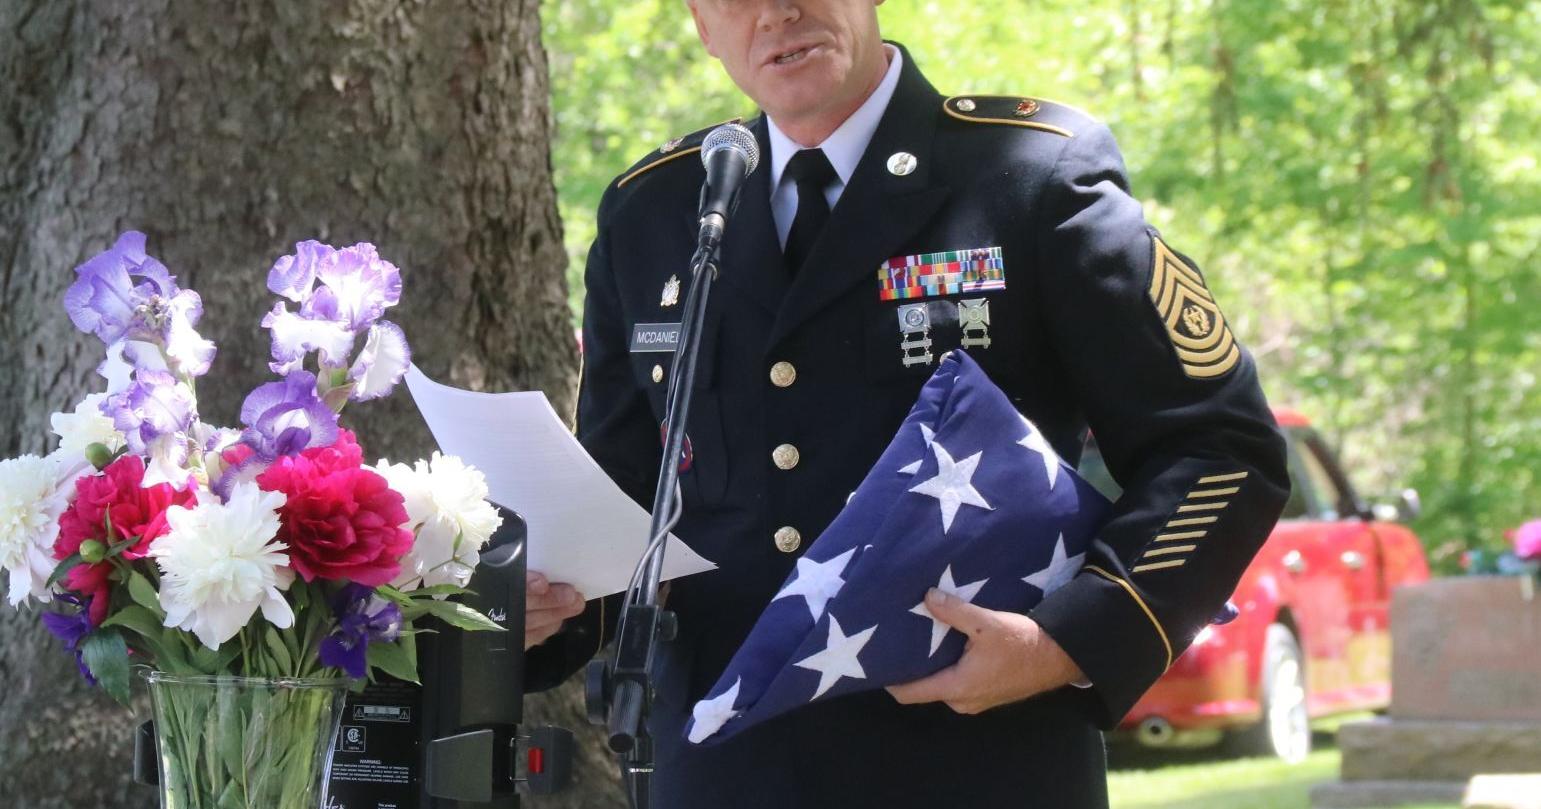 Memorial services honor sacrifices for freedom